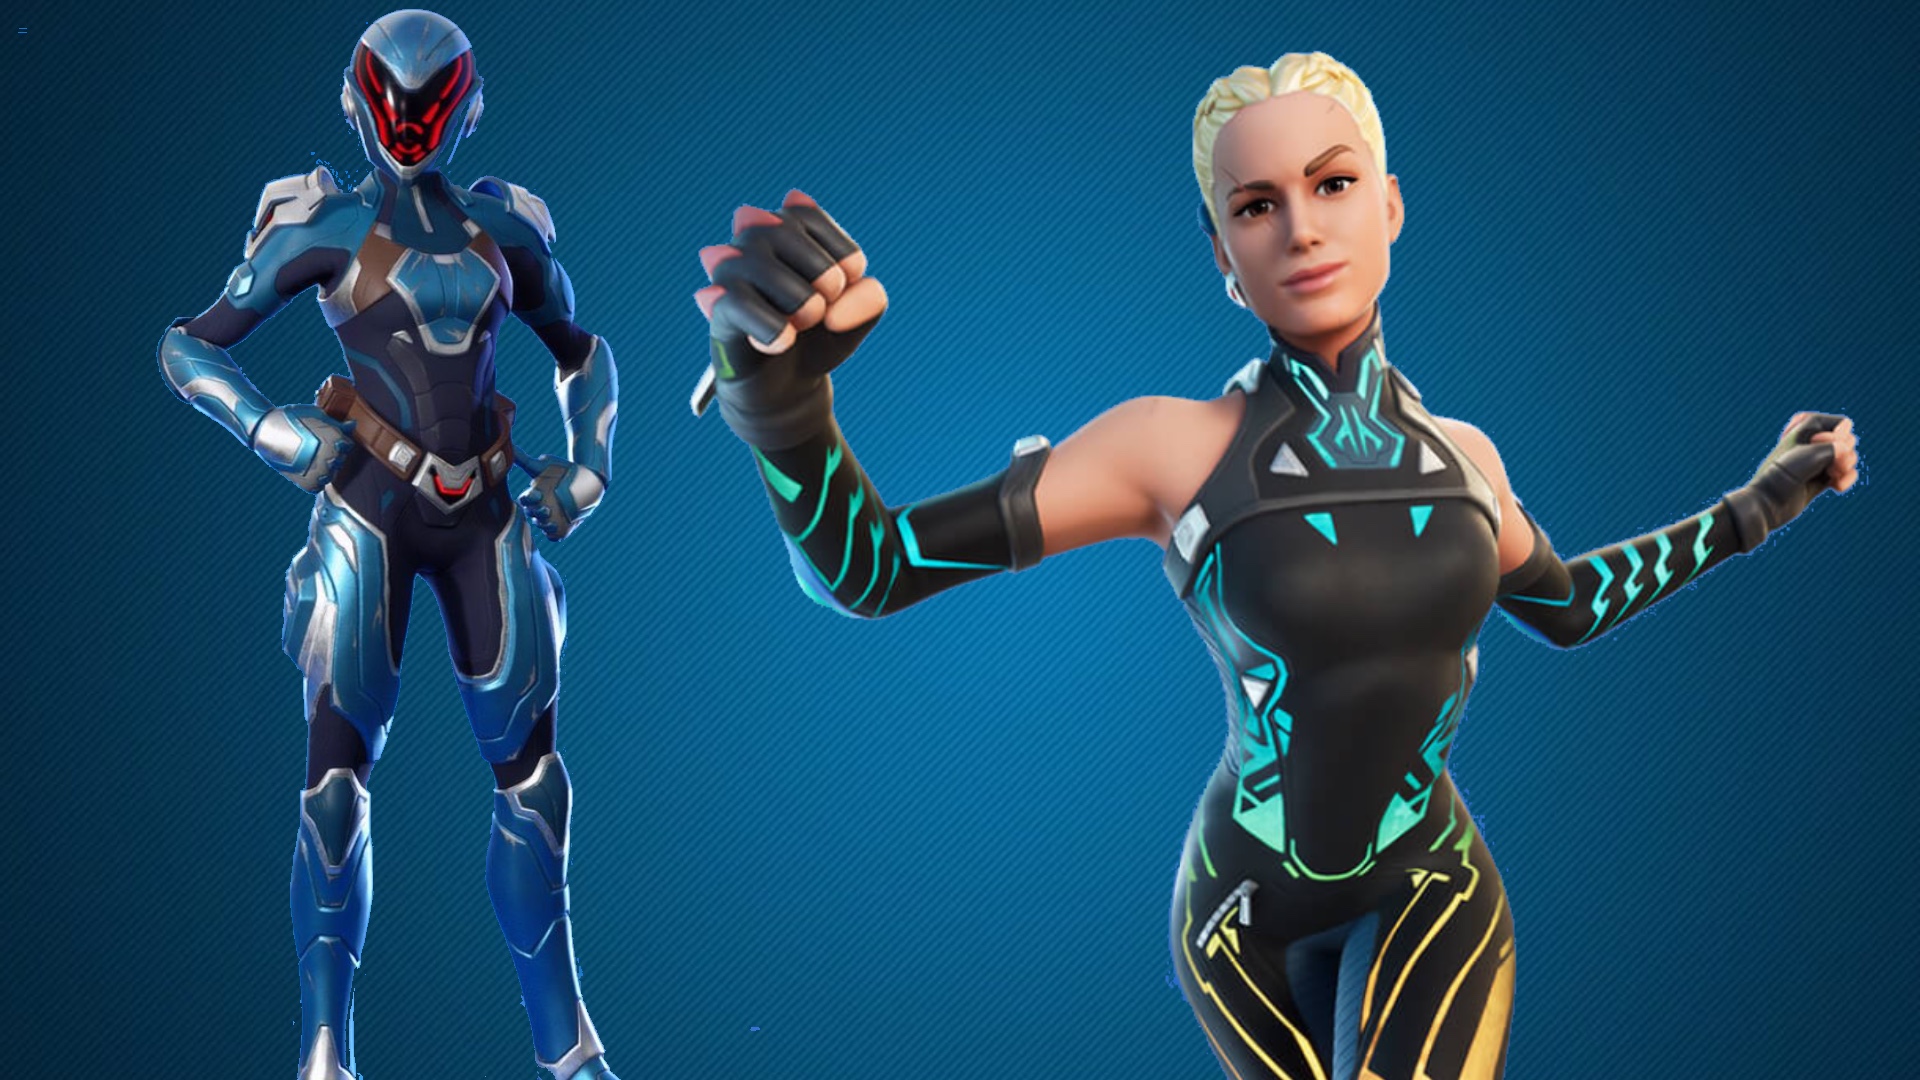 Paradigm from Fortnite Paradise is unlocked when you buy the battle pass